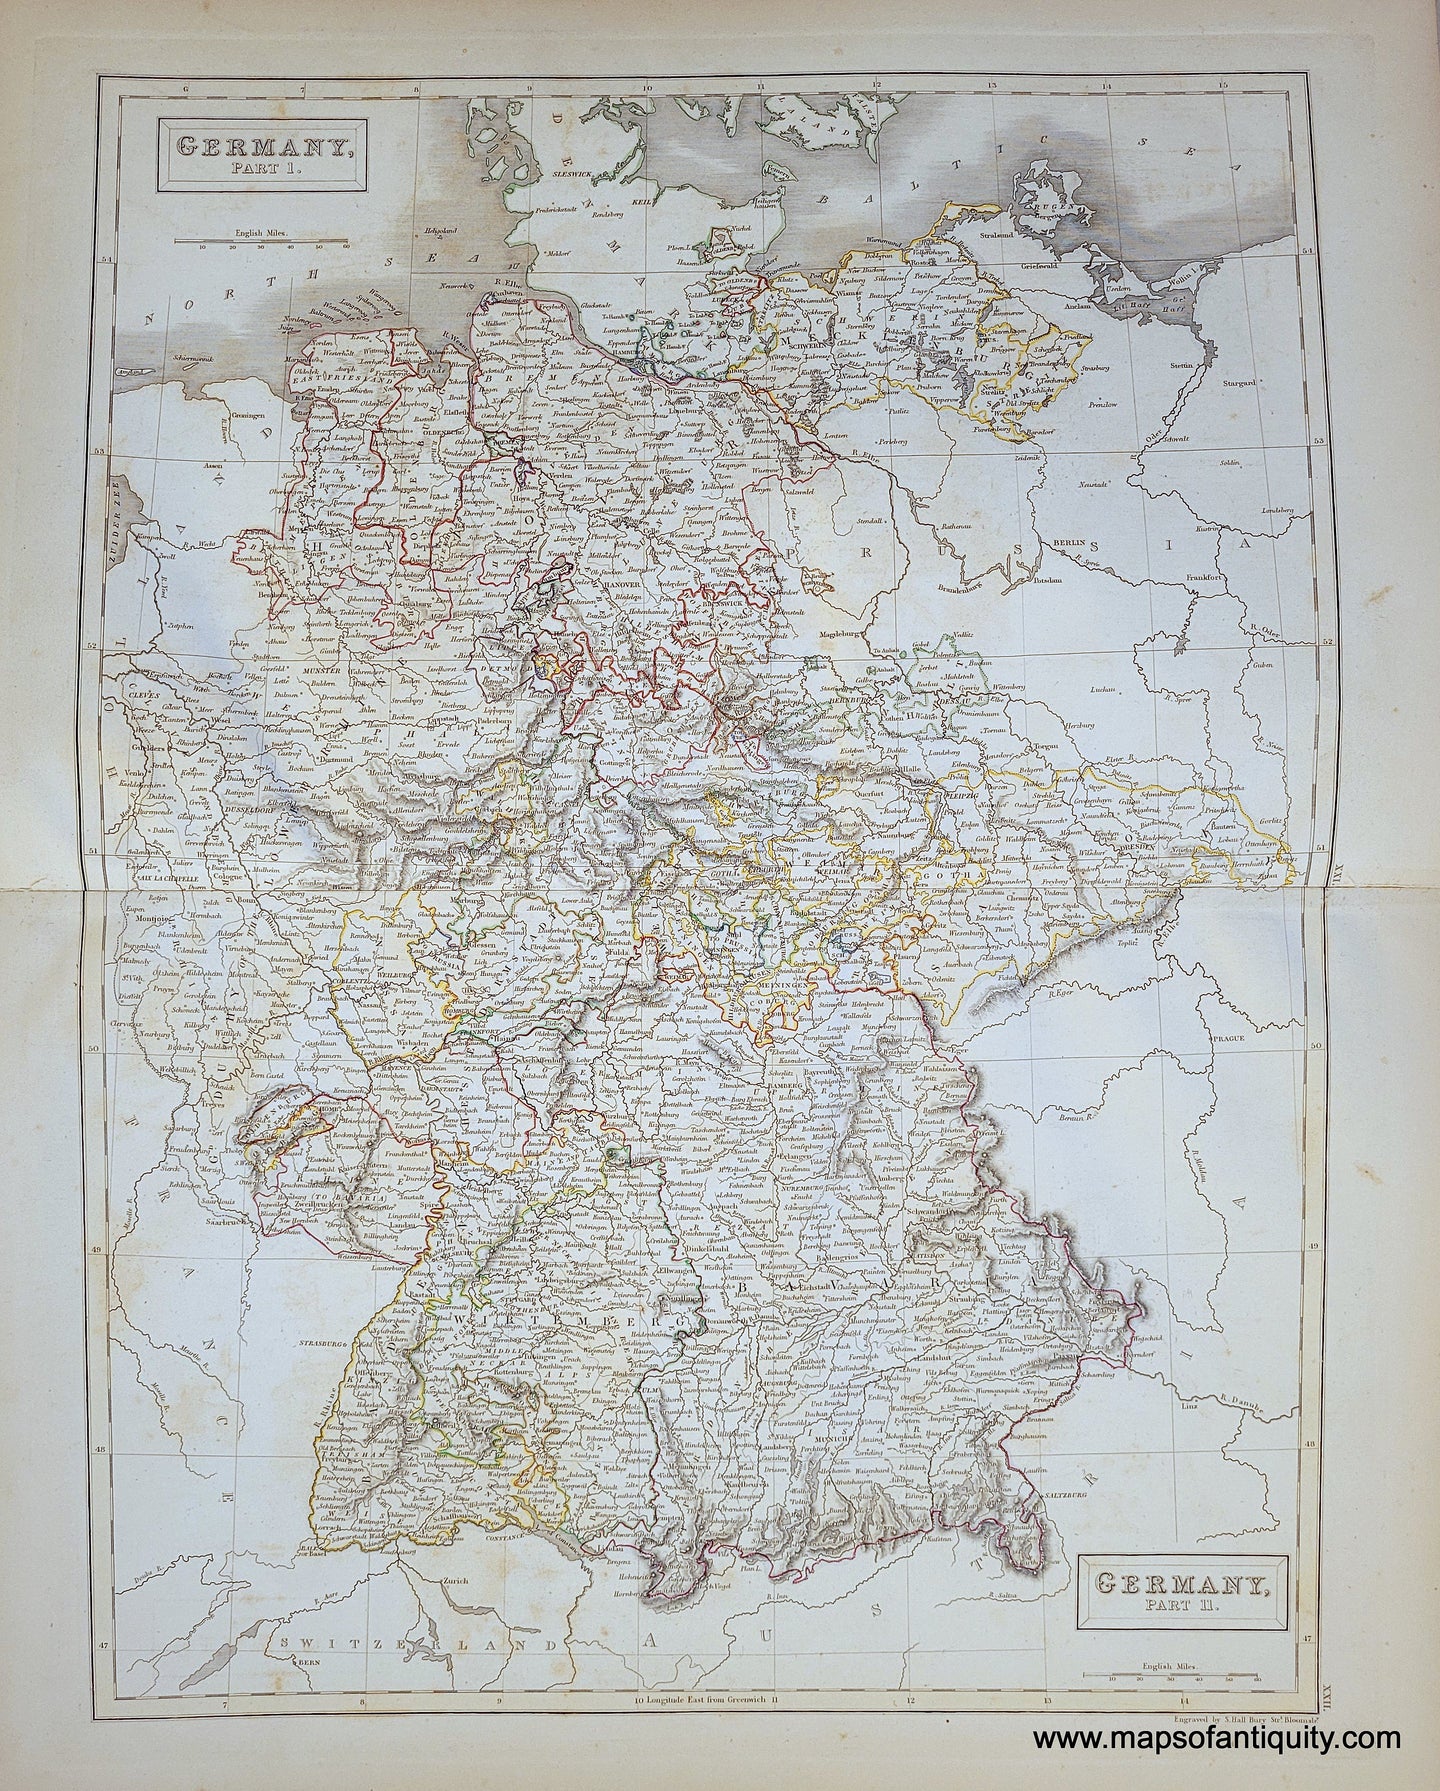 Genuine-Antique-Map-Germany-Parts-I-and-II-1841-Black-Maps-Of-Antiquity